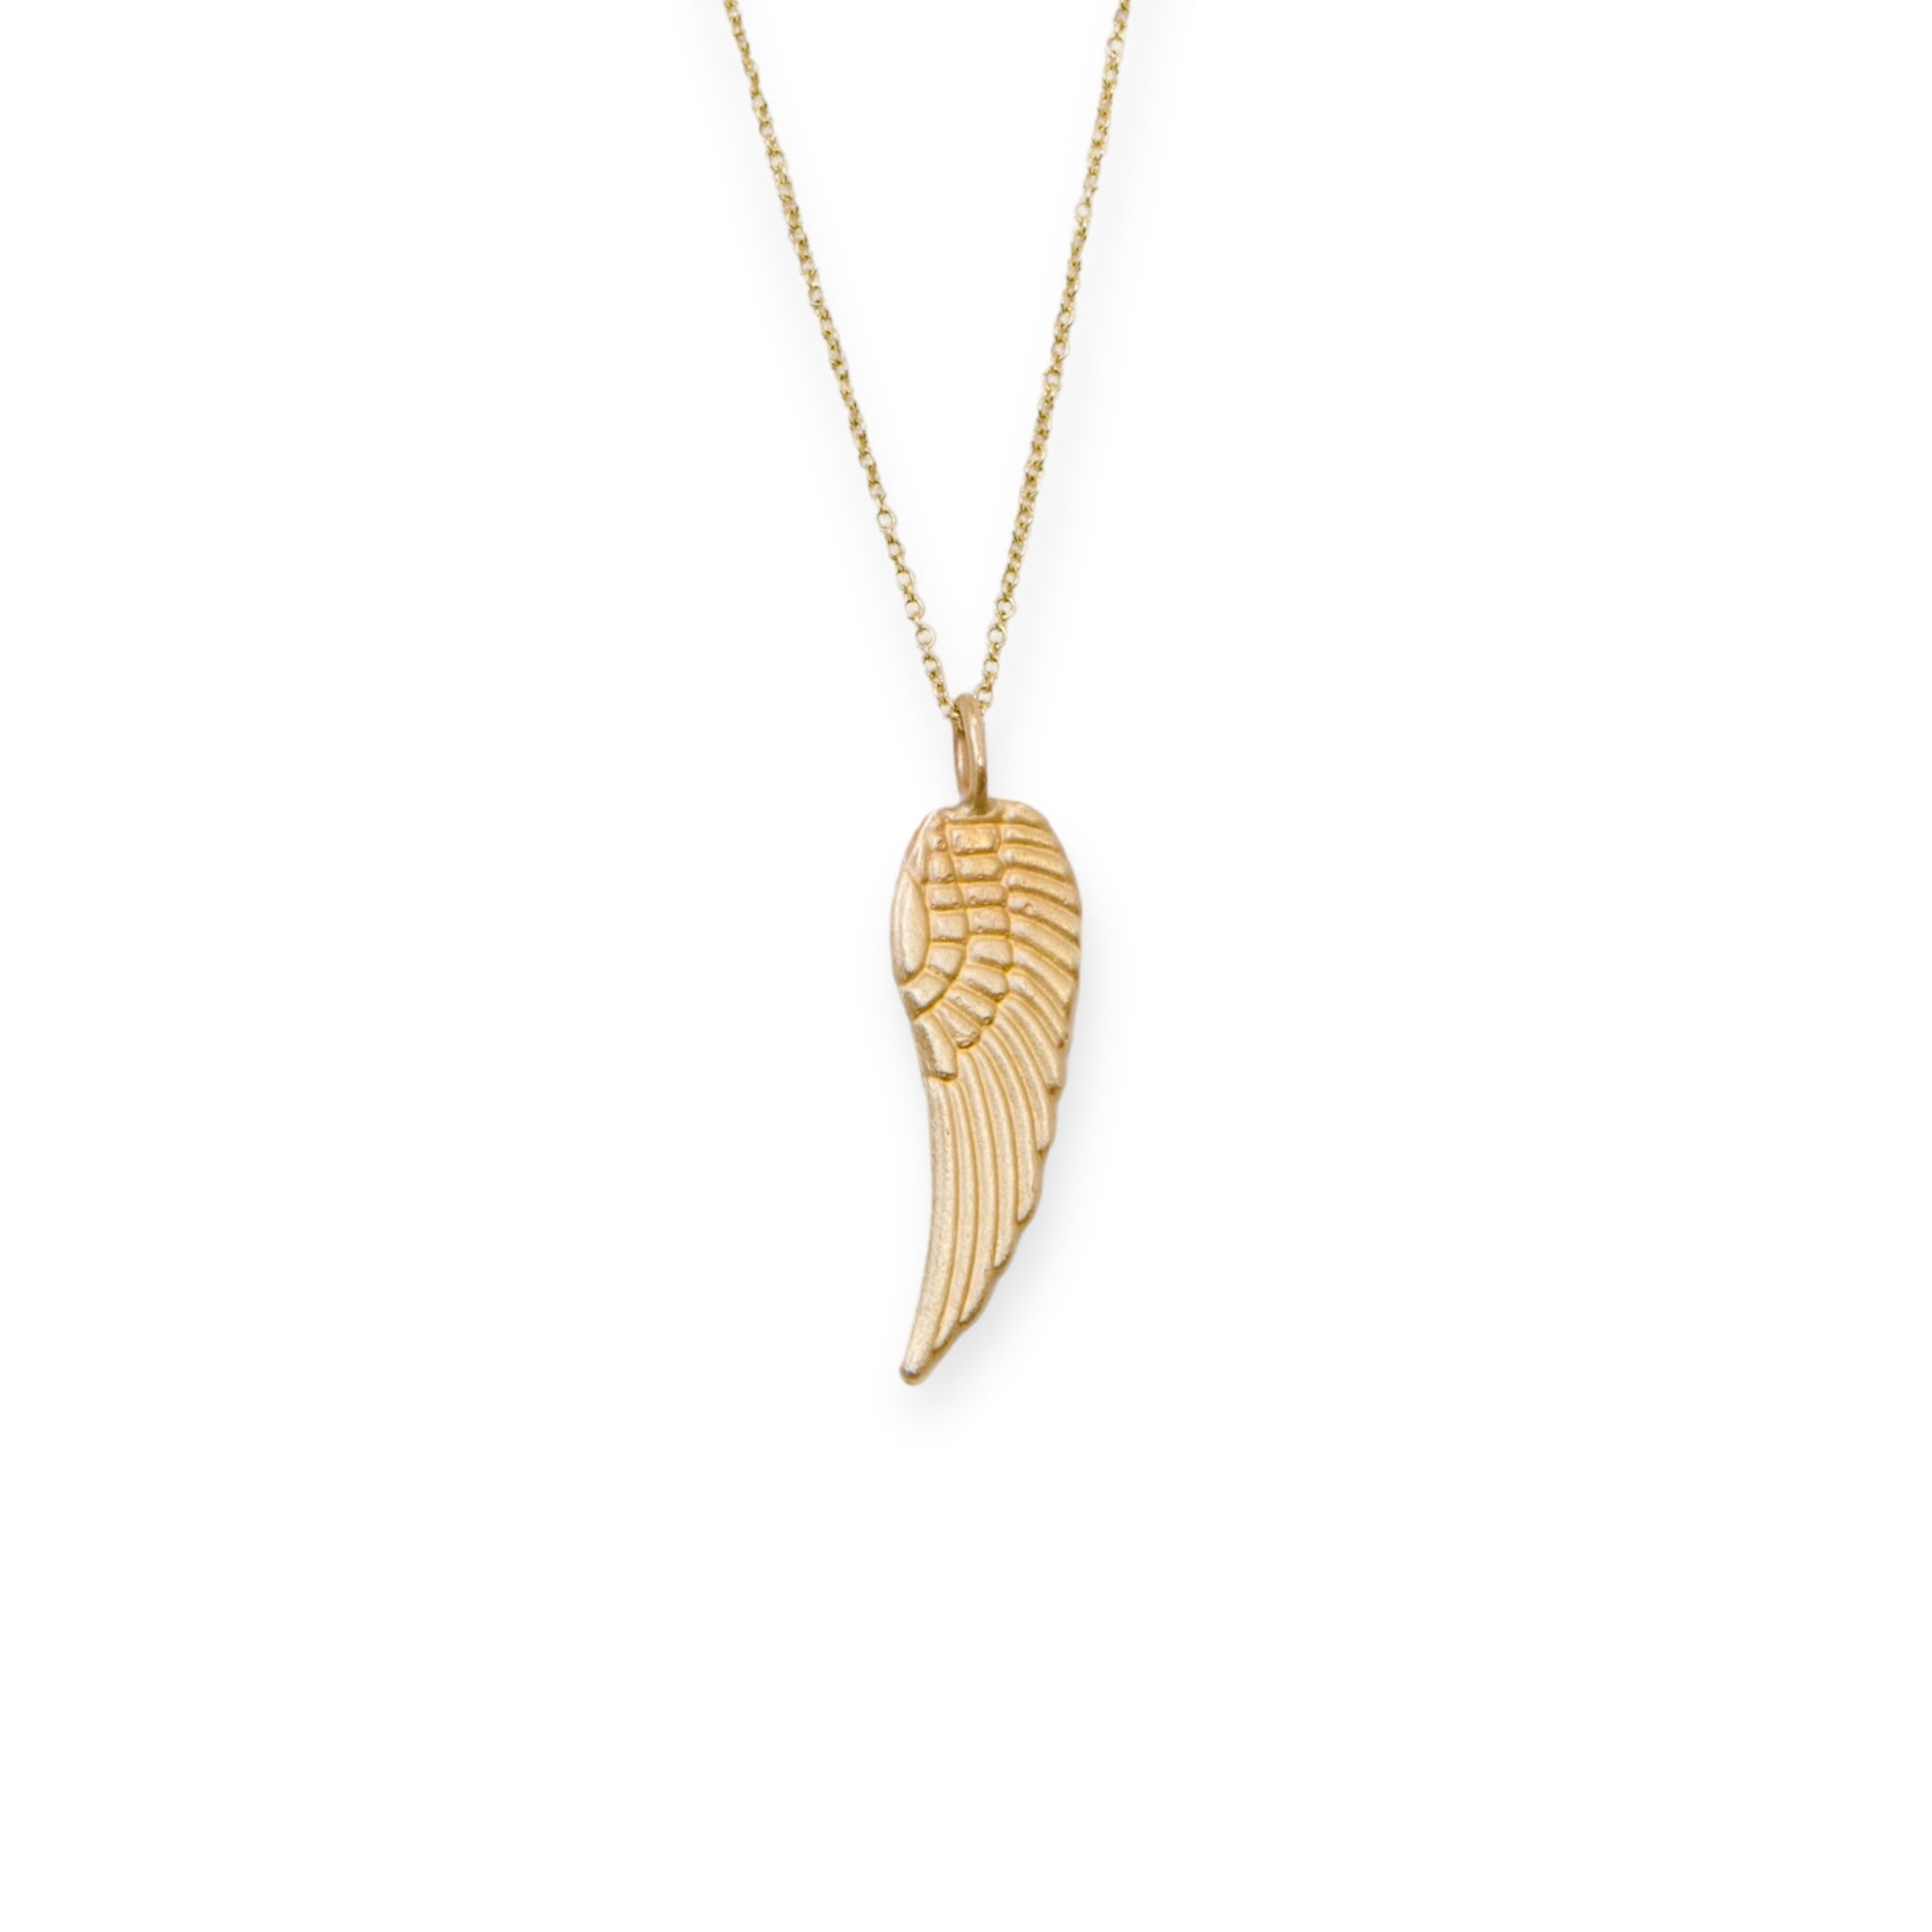 WD449, 14kt gold Large Angel Wing pendant. Chain sold separately.